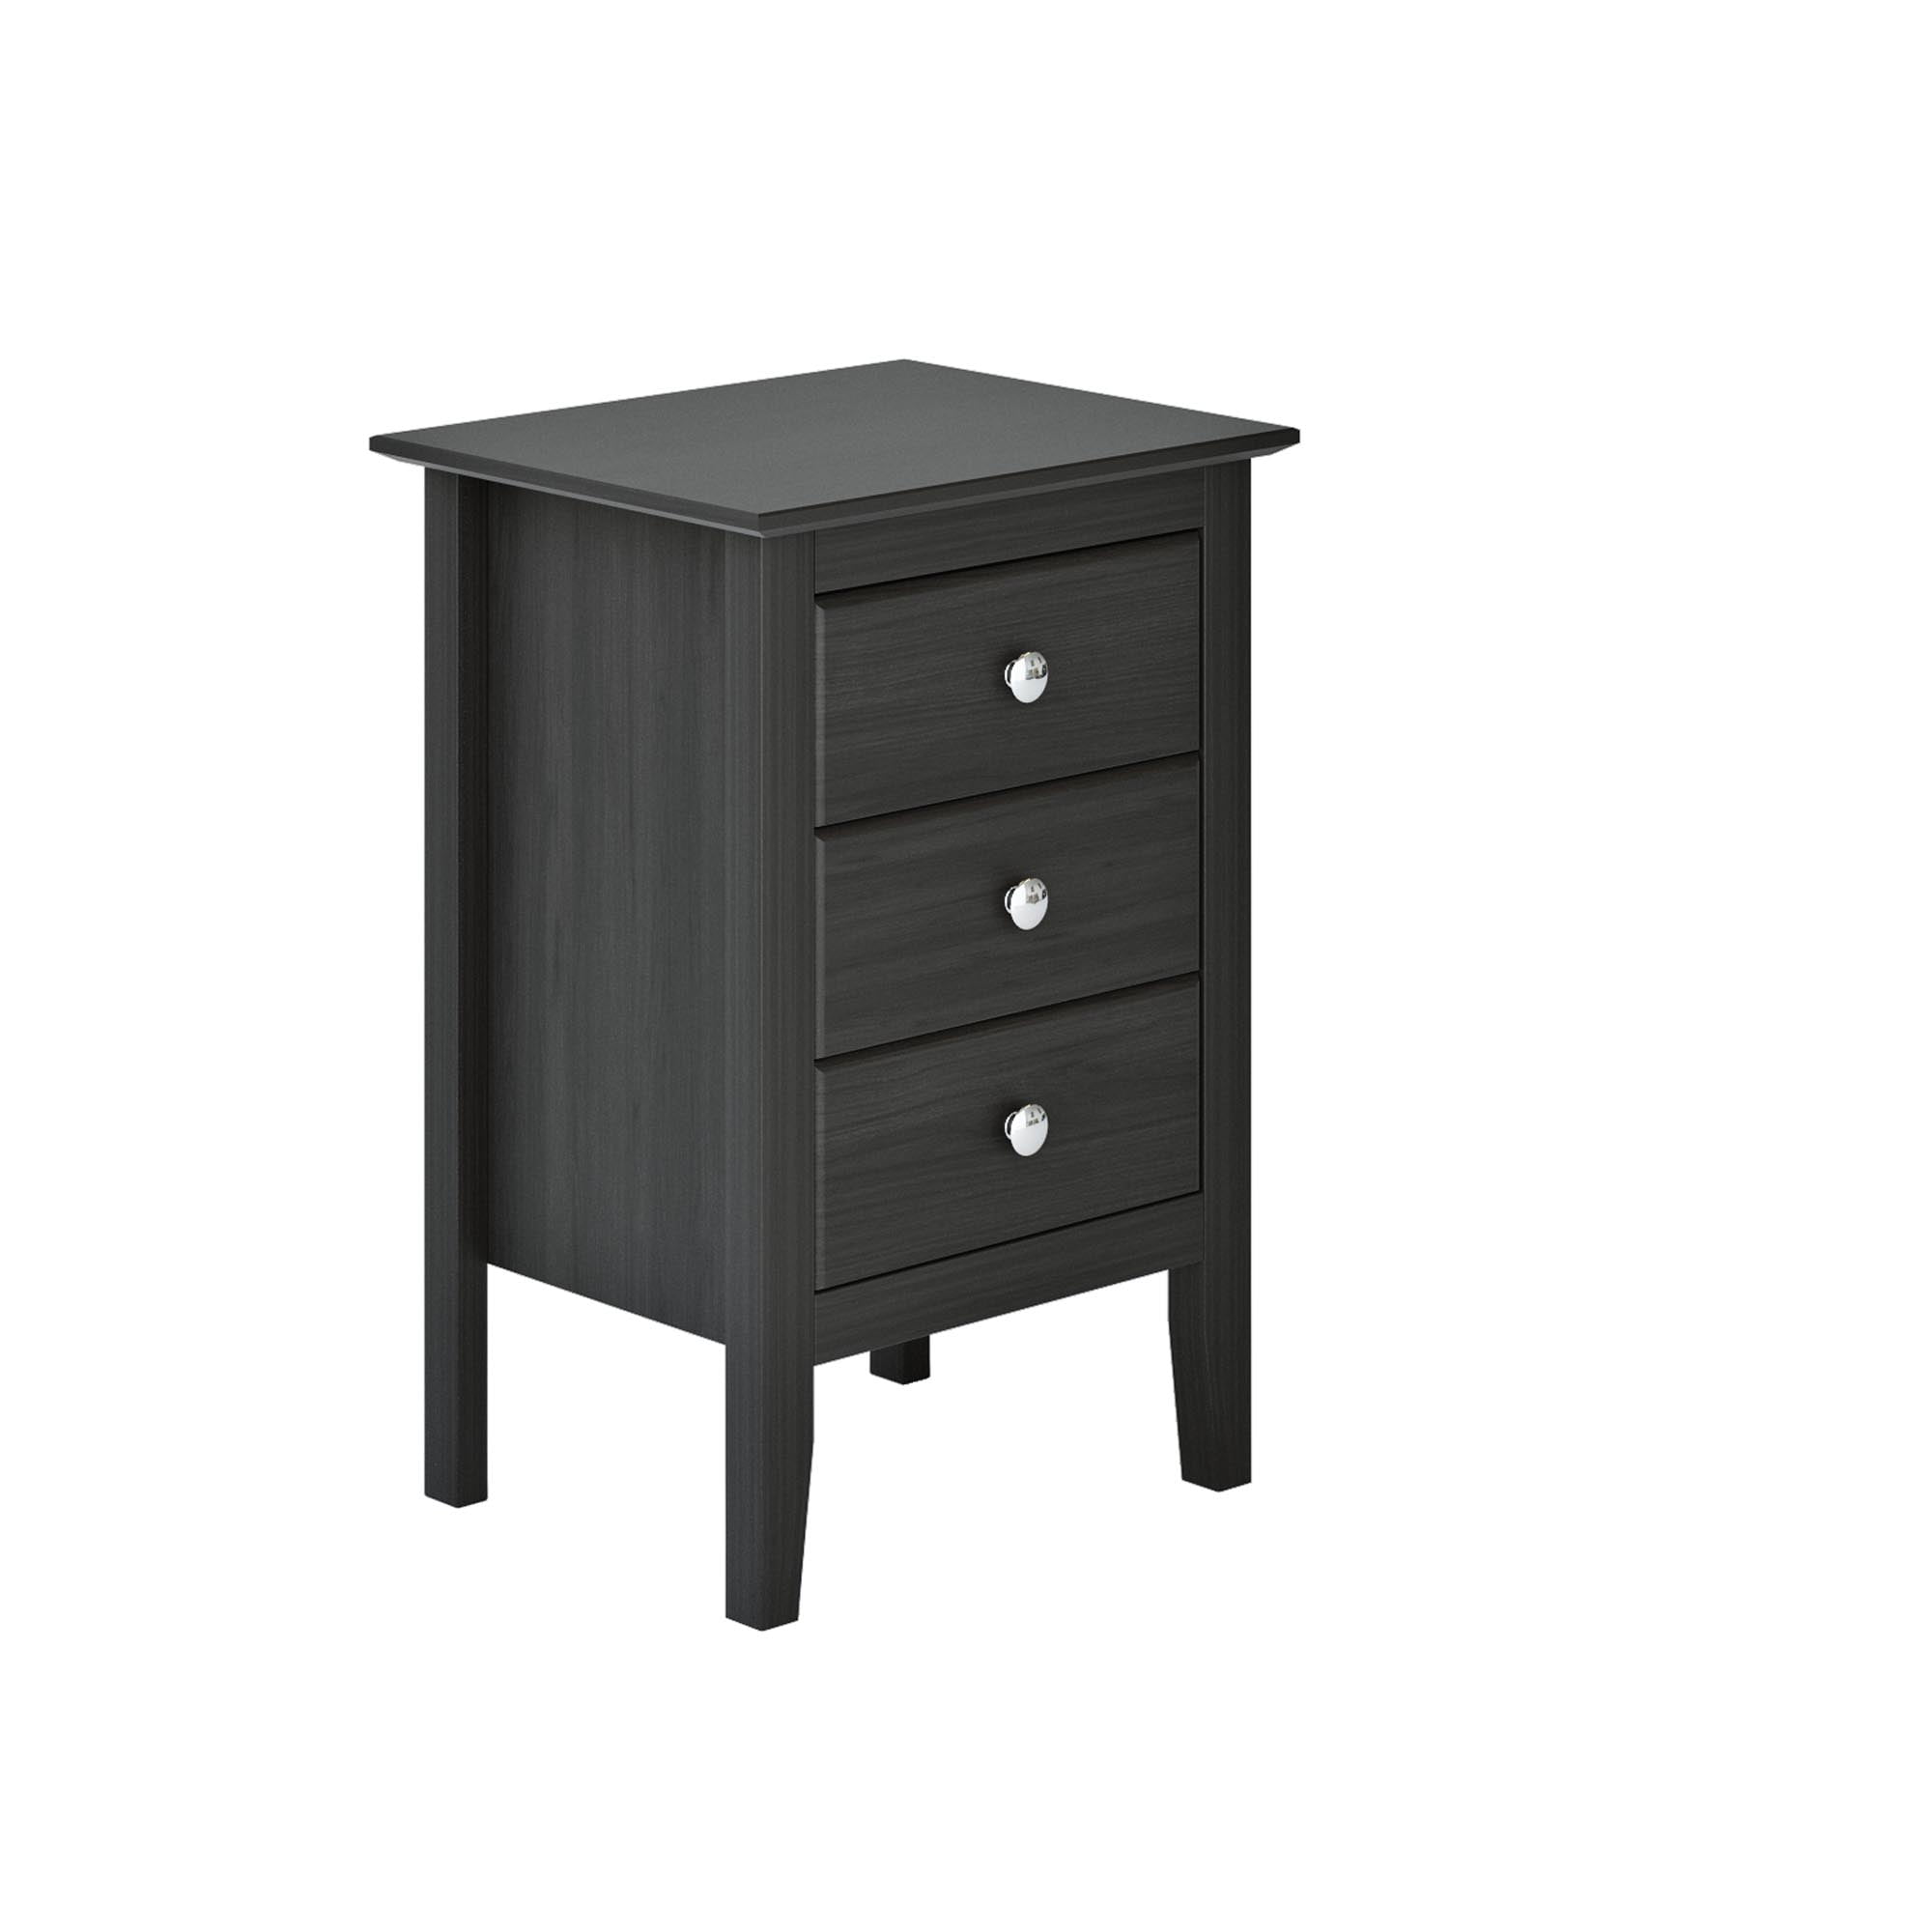 Painted Pair of Shaker Style 1 Drawer Petite Nightstands White Bedside Tables 